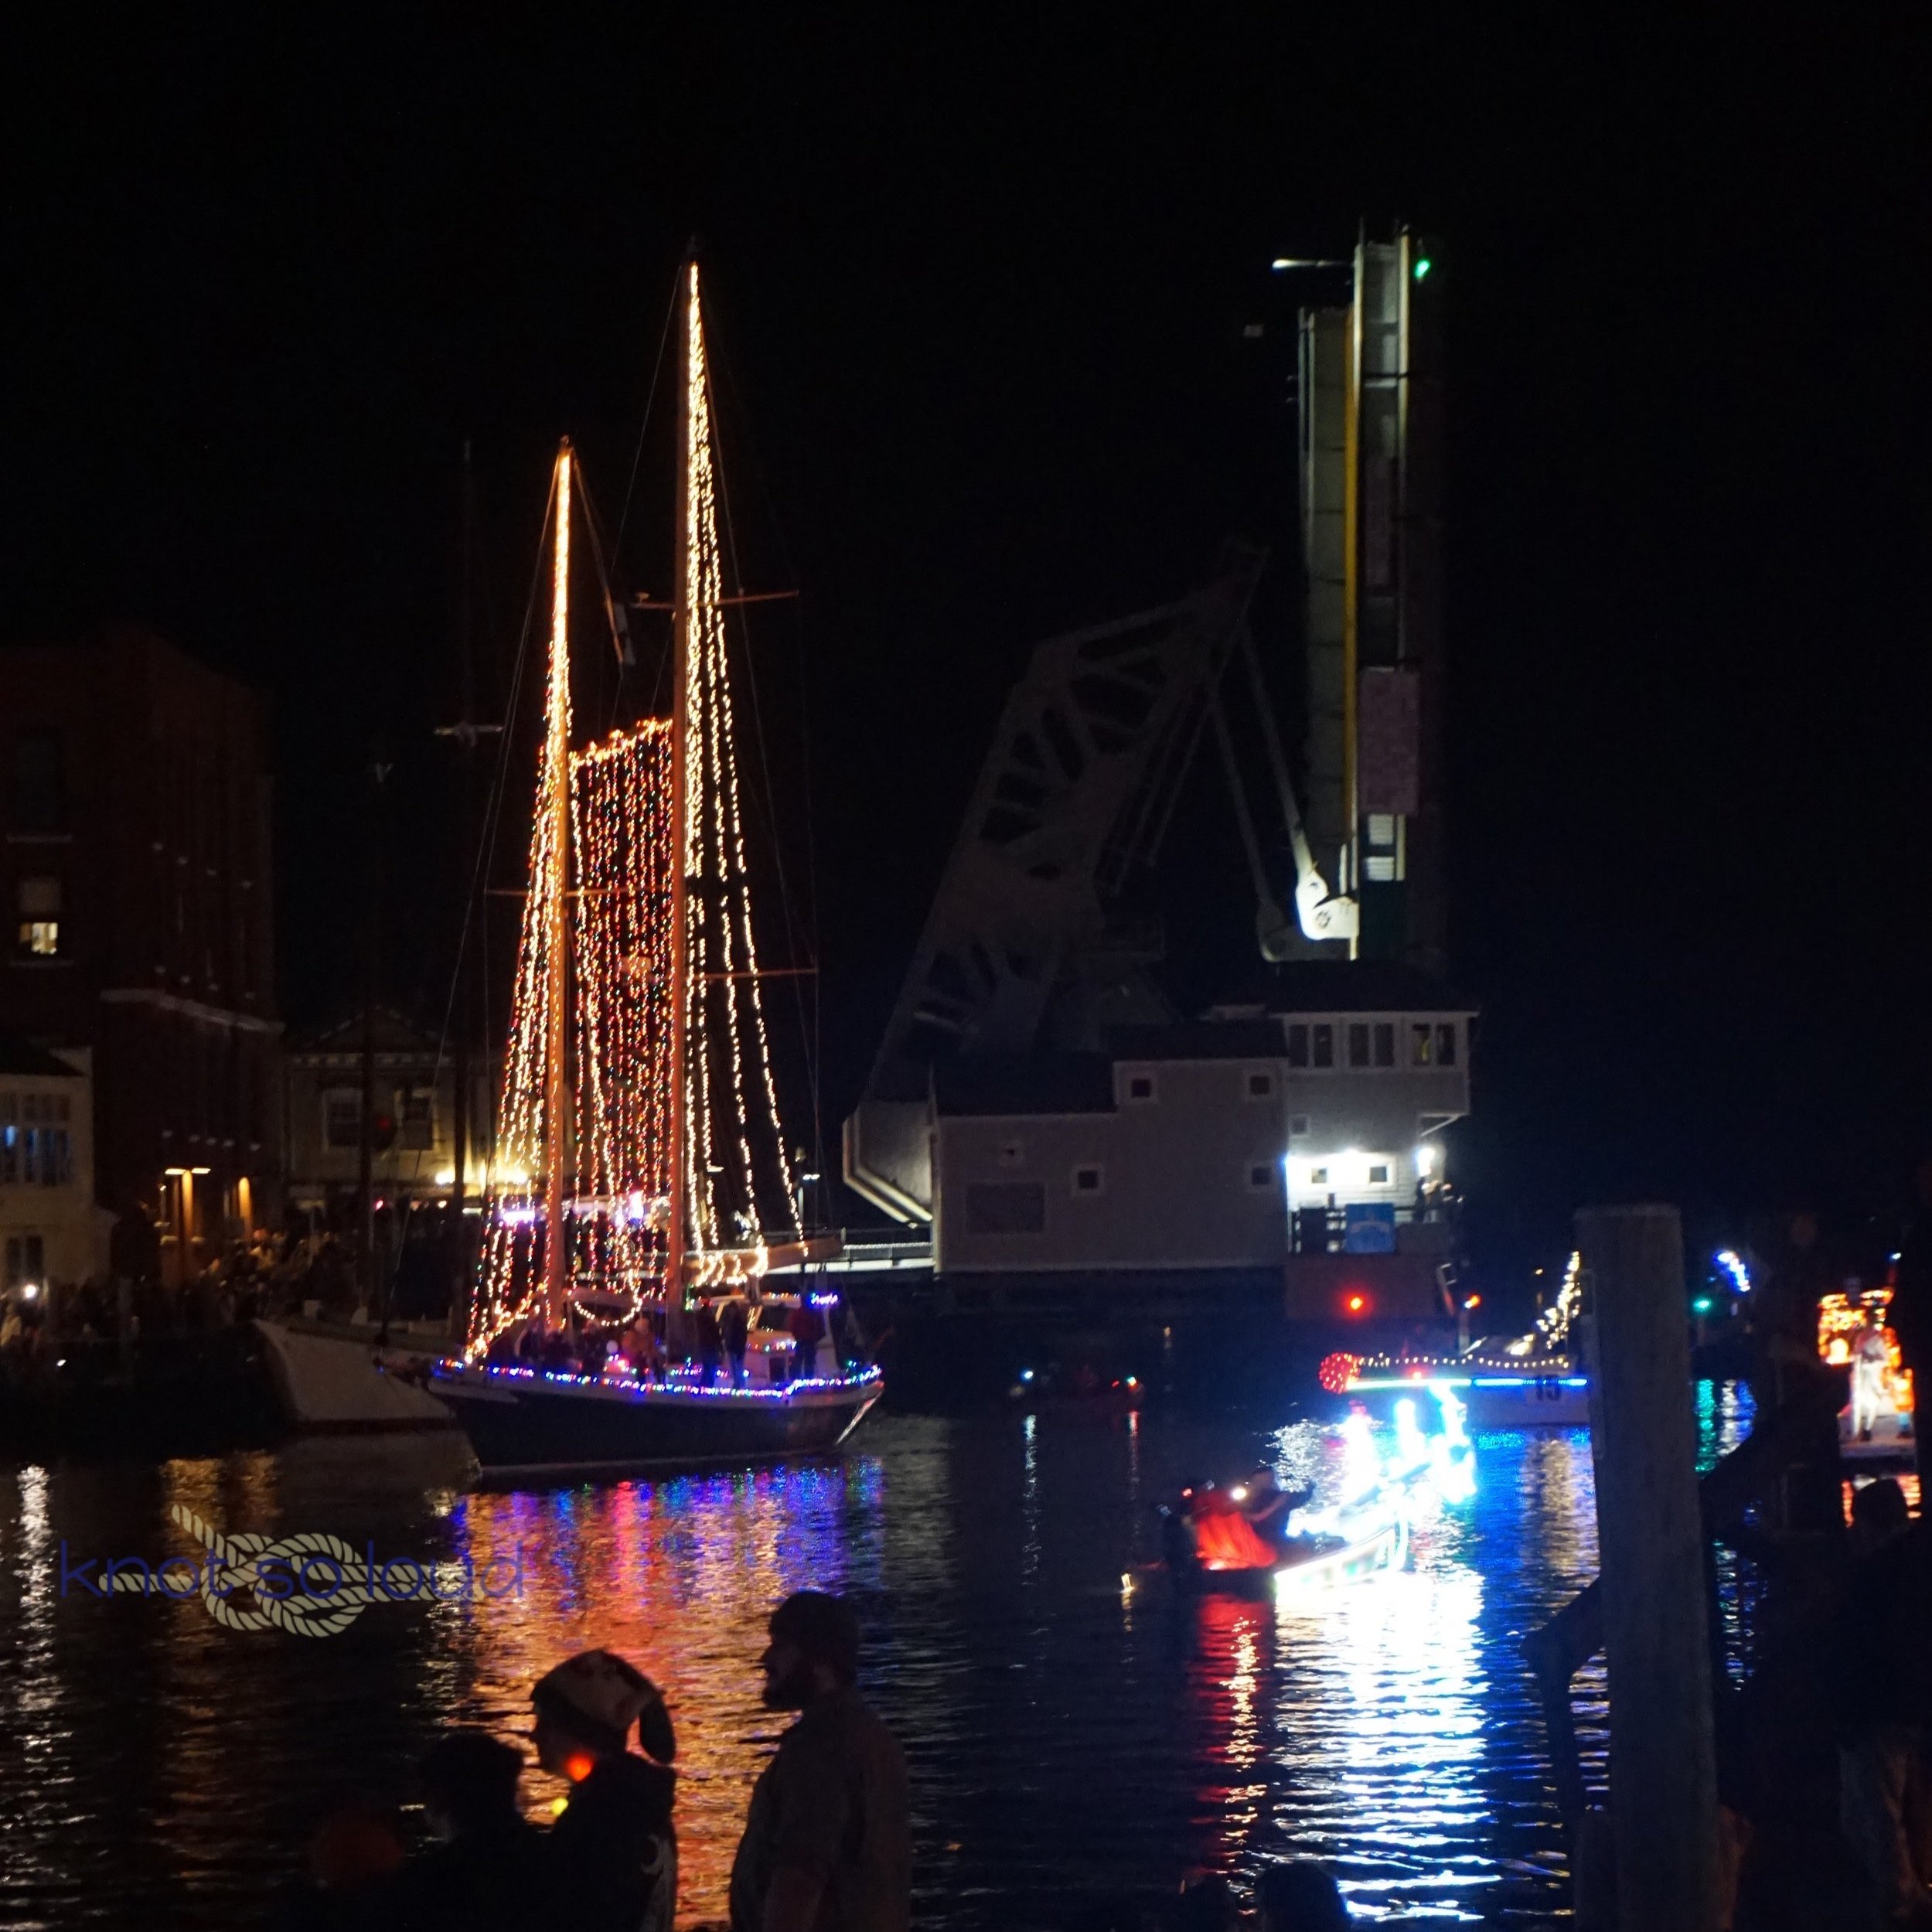 Holiday Lighted Boat Parade — knot so loud